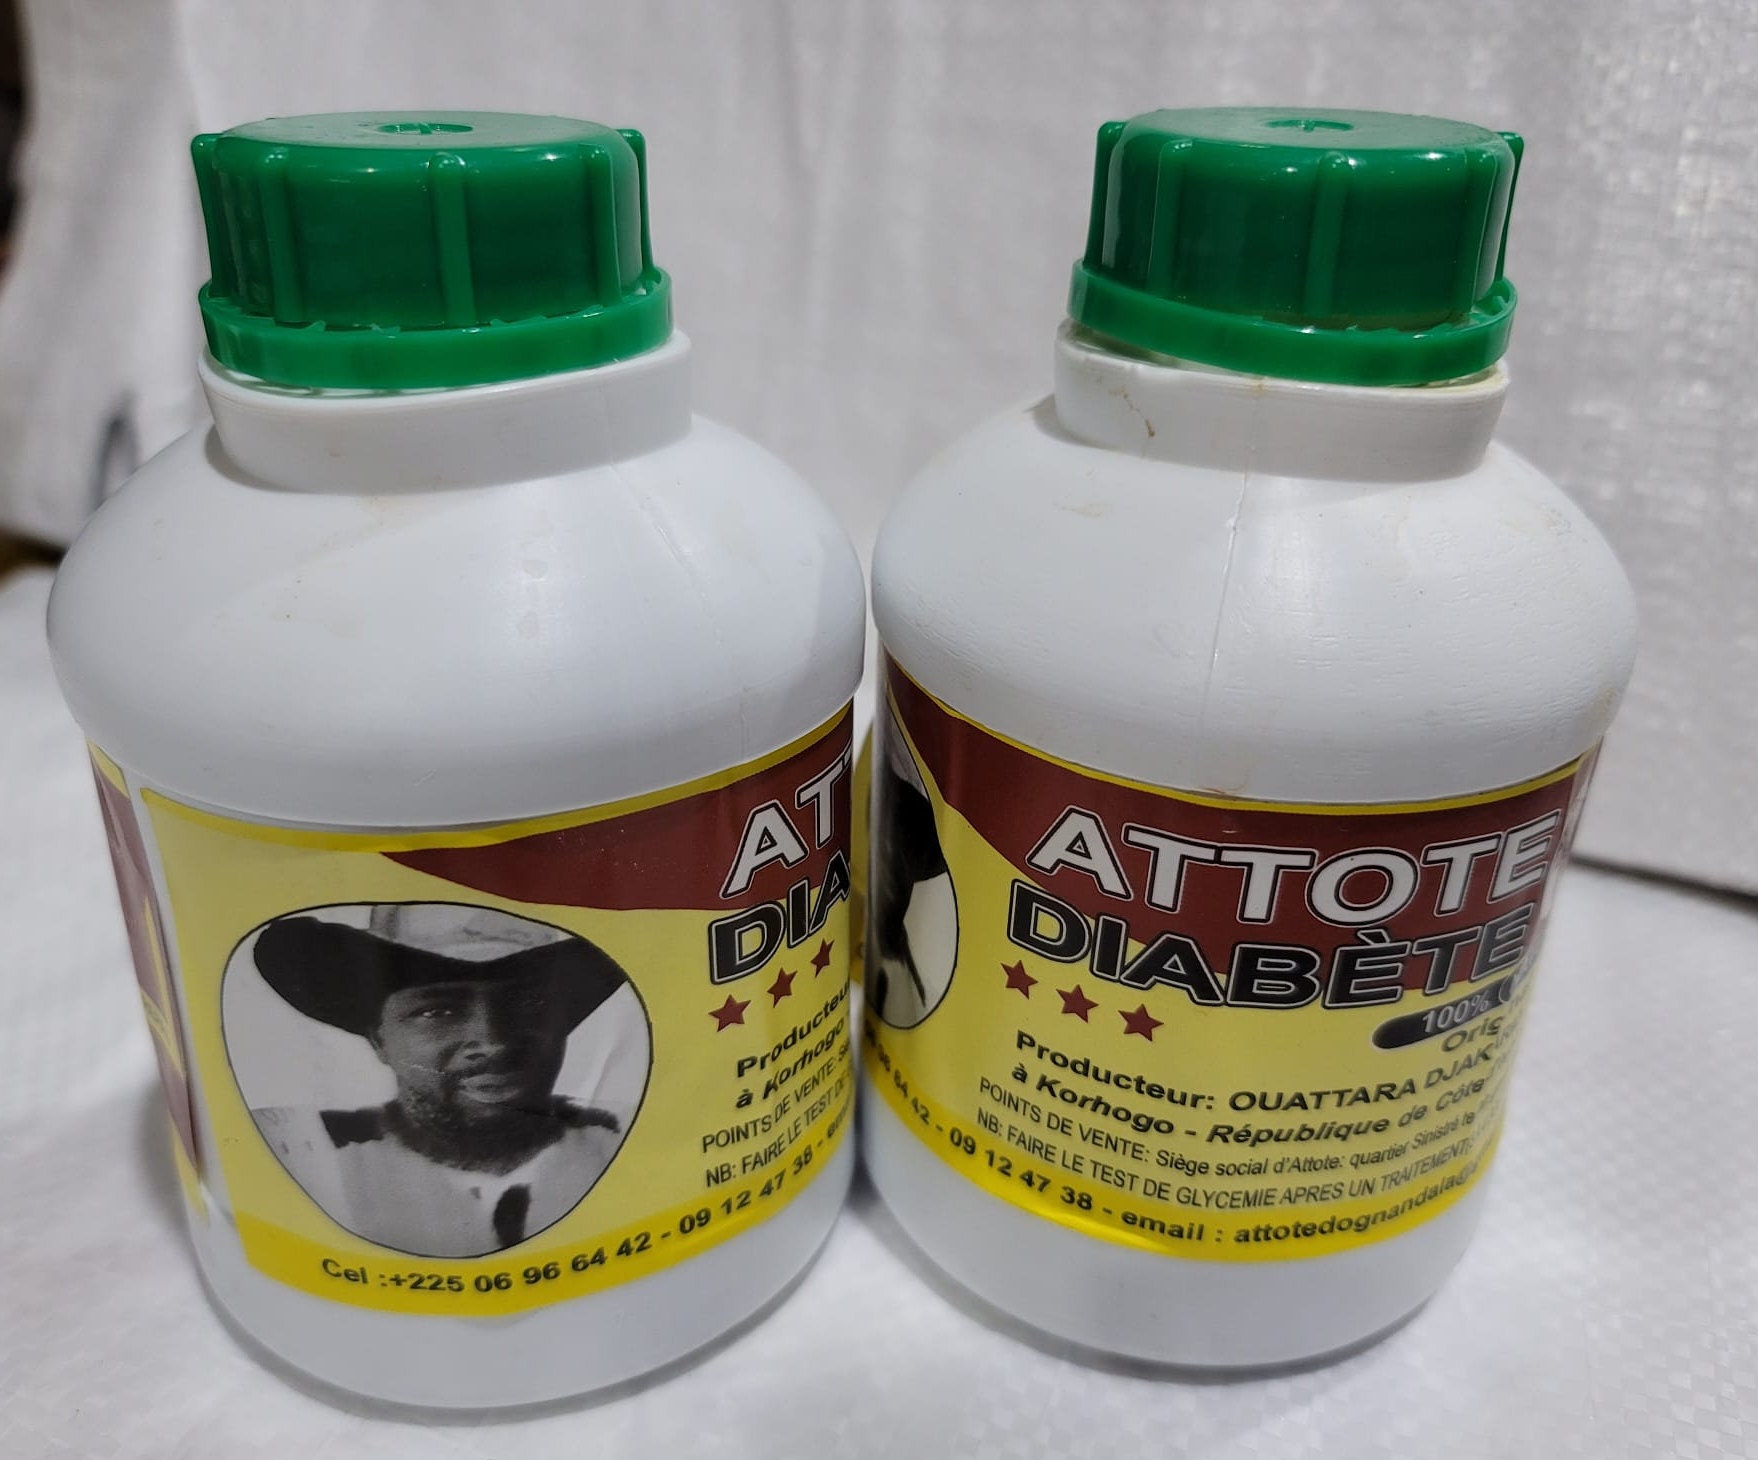 African Attote MEN POWER BEDROOM Boosts Male Sexual Potency & Performa –  www.